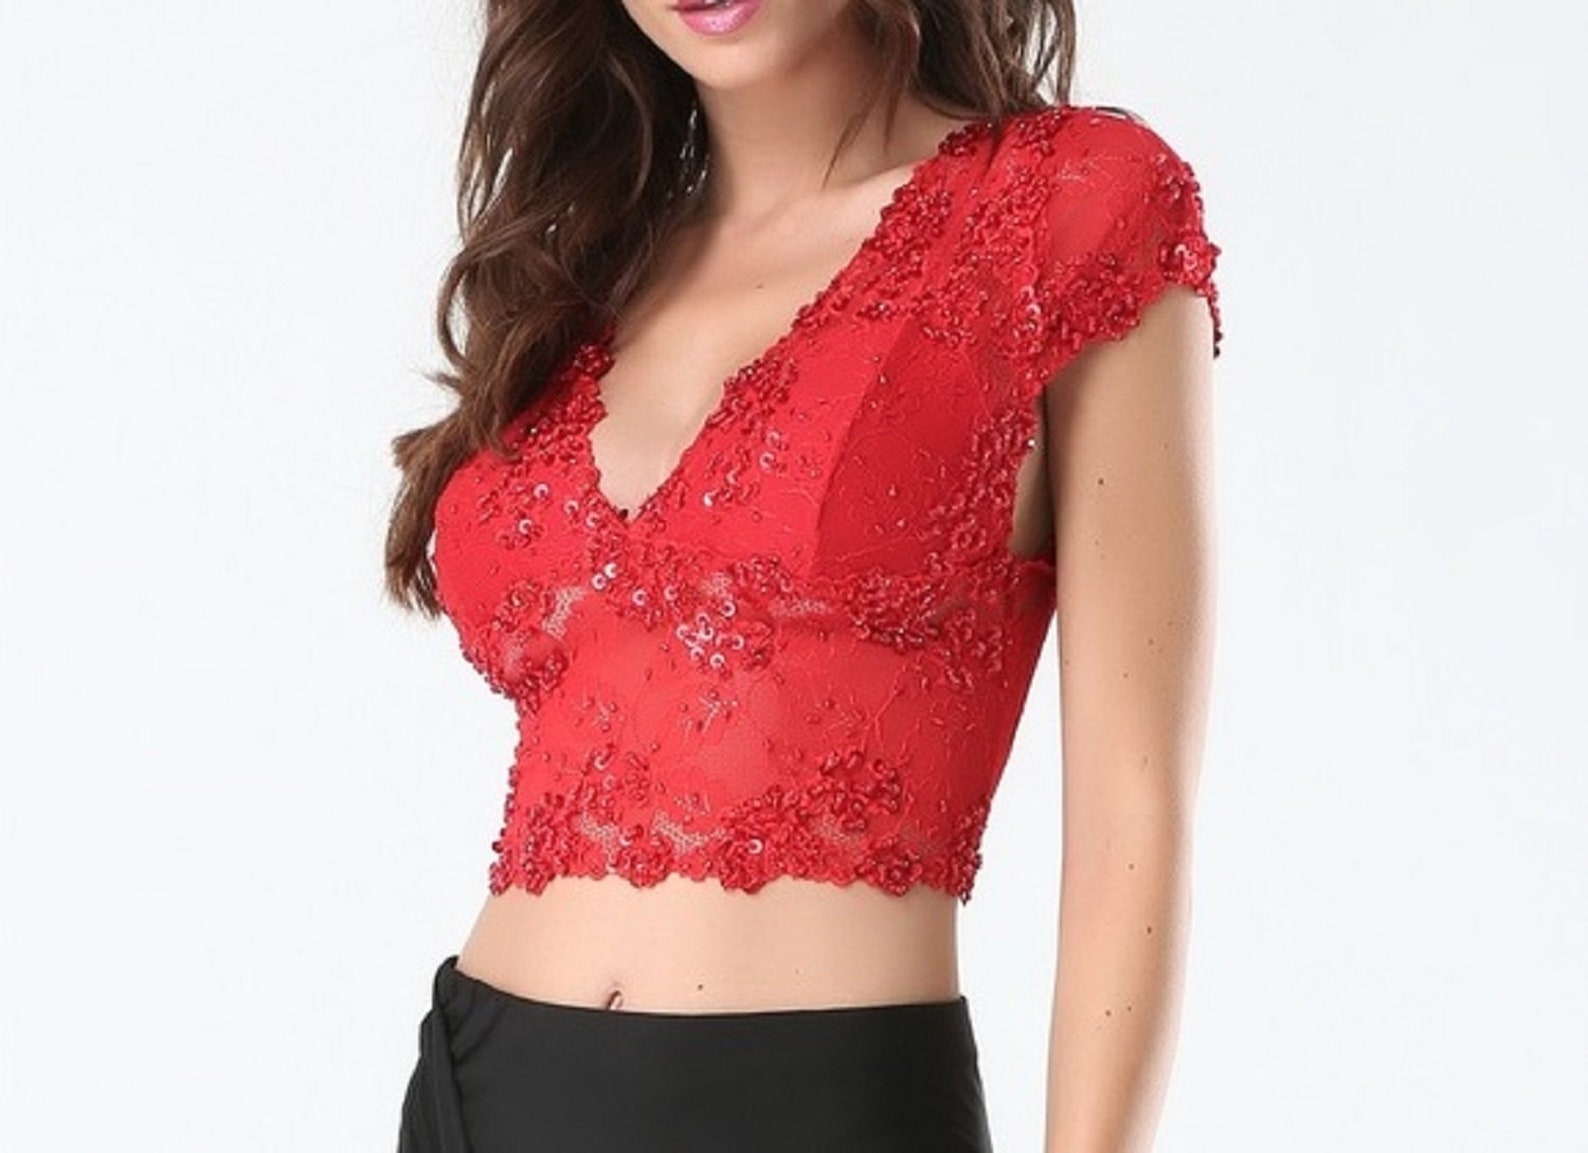 Sequinned Red Lace Crop Top Cap Sleeved Short Shirt Blouse - Etsy